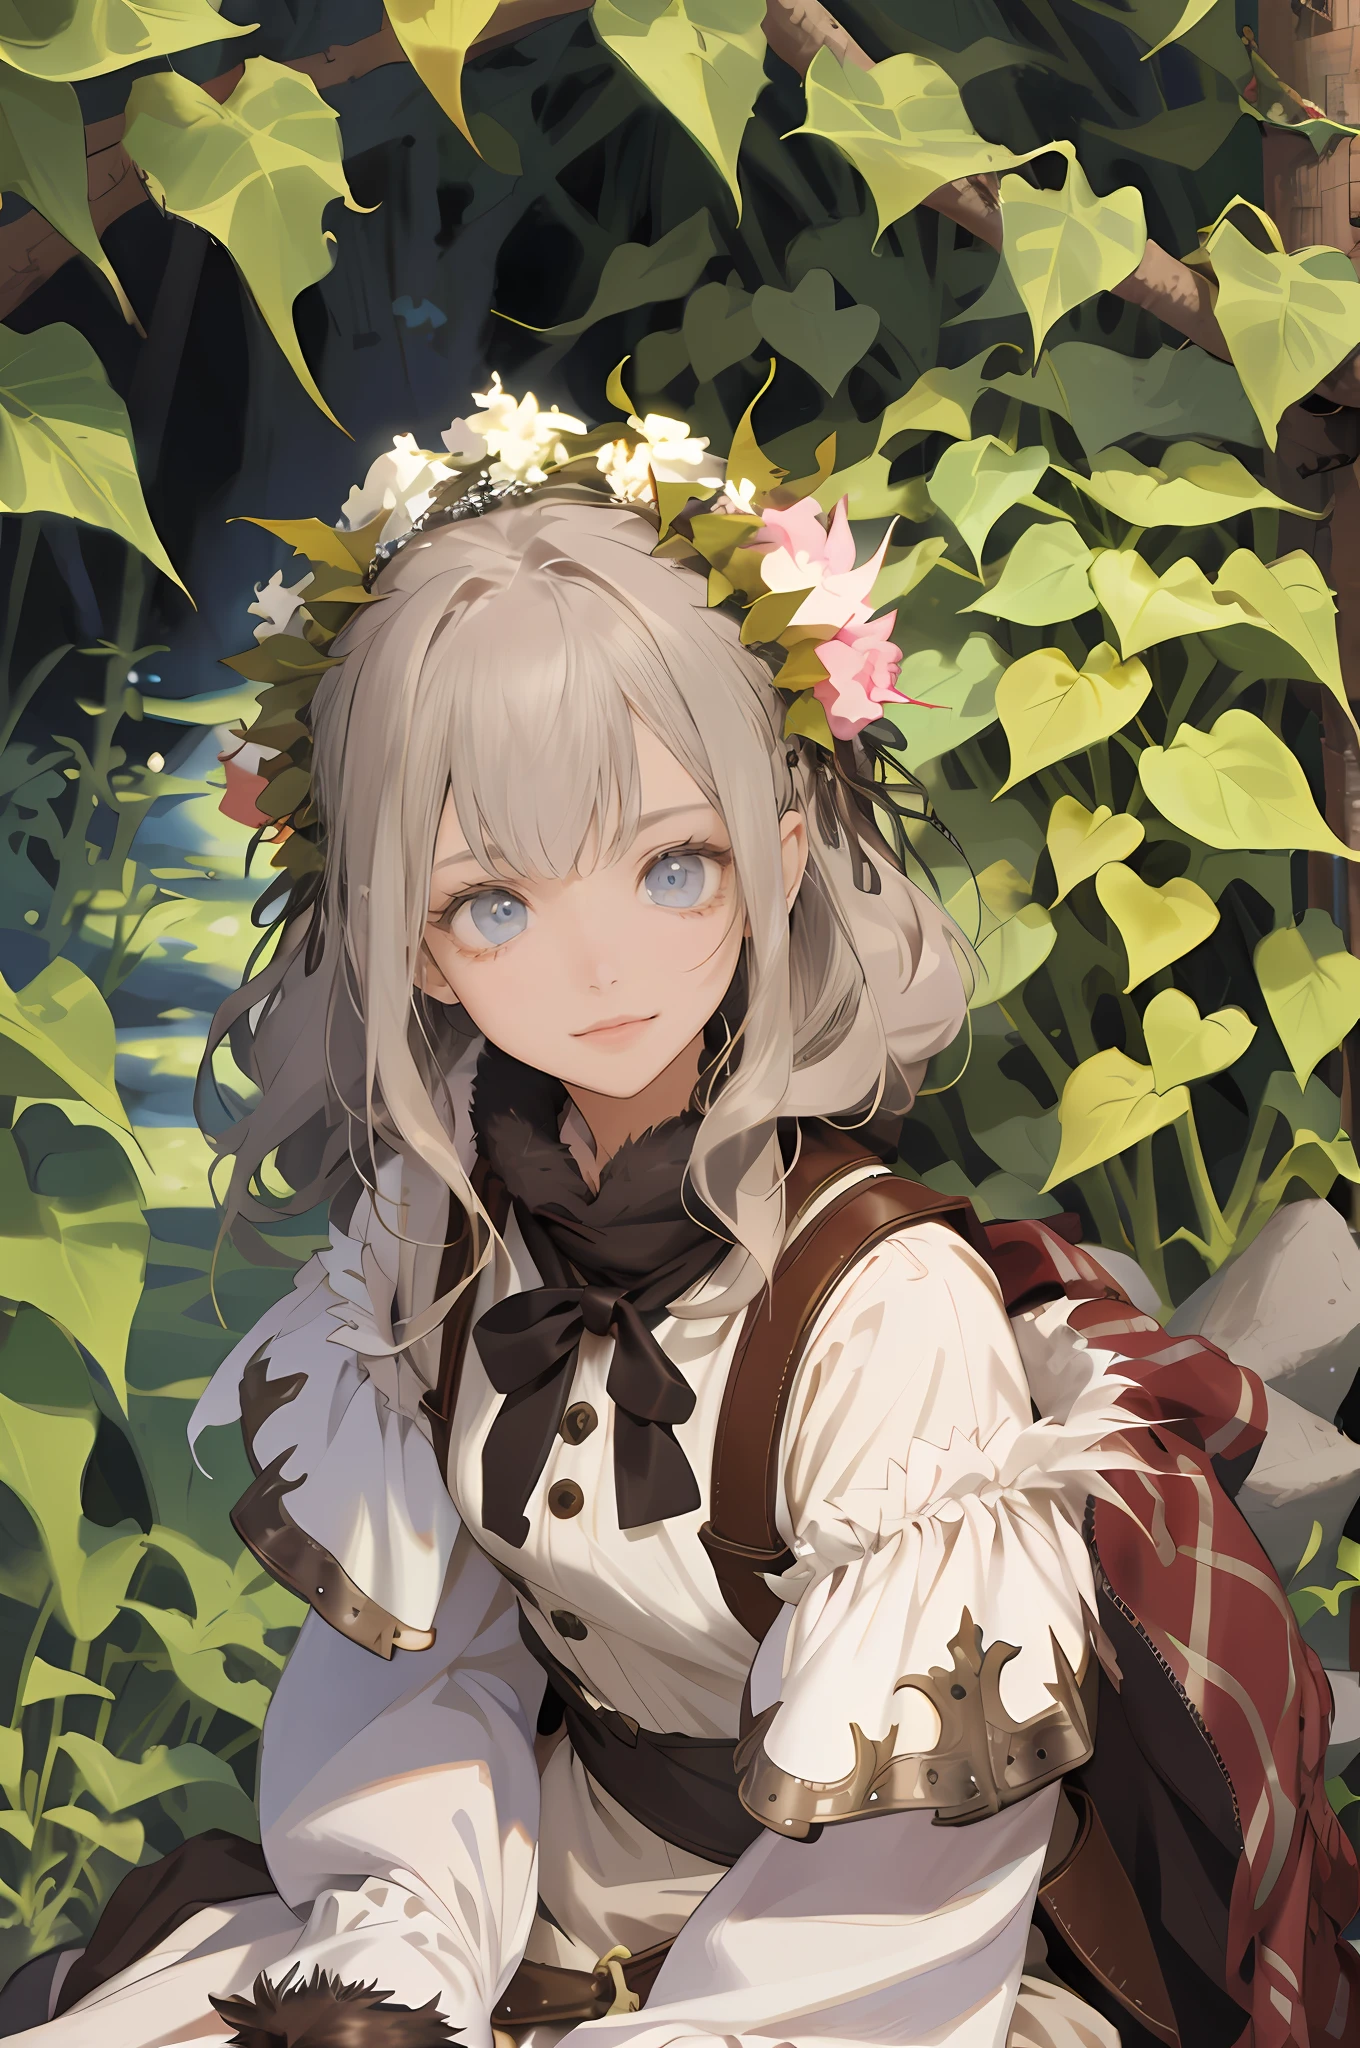 (absurdress, hight resolution, Ultra Detailed), 1girl, solo, extremely detailed eyes, Colorful, highest detail, Portrait, Looking Up, solo, half shot, Detailed background, Detailed Face, Robin Hood, slight smile, sitting, medieval fantasy setting, high fantasy, brown leather clothing with fur,  gloves,     The Enchanted Forest, Bushes, Vines, ivy, rocks, rivers,     ferns, Flowers, (Butterflies:0.9), feathers, wildlife,